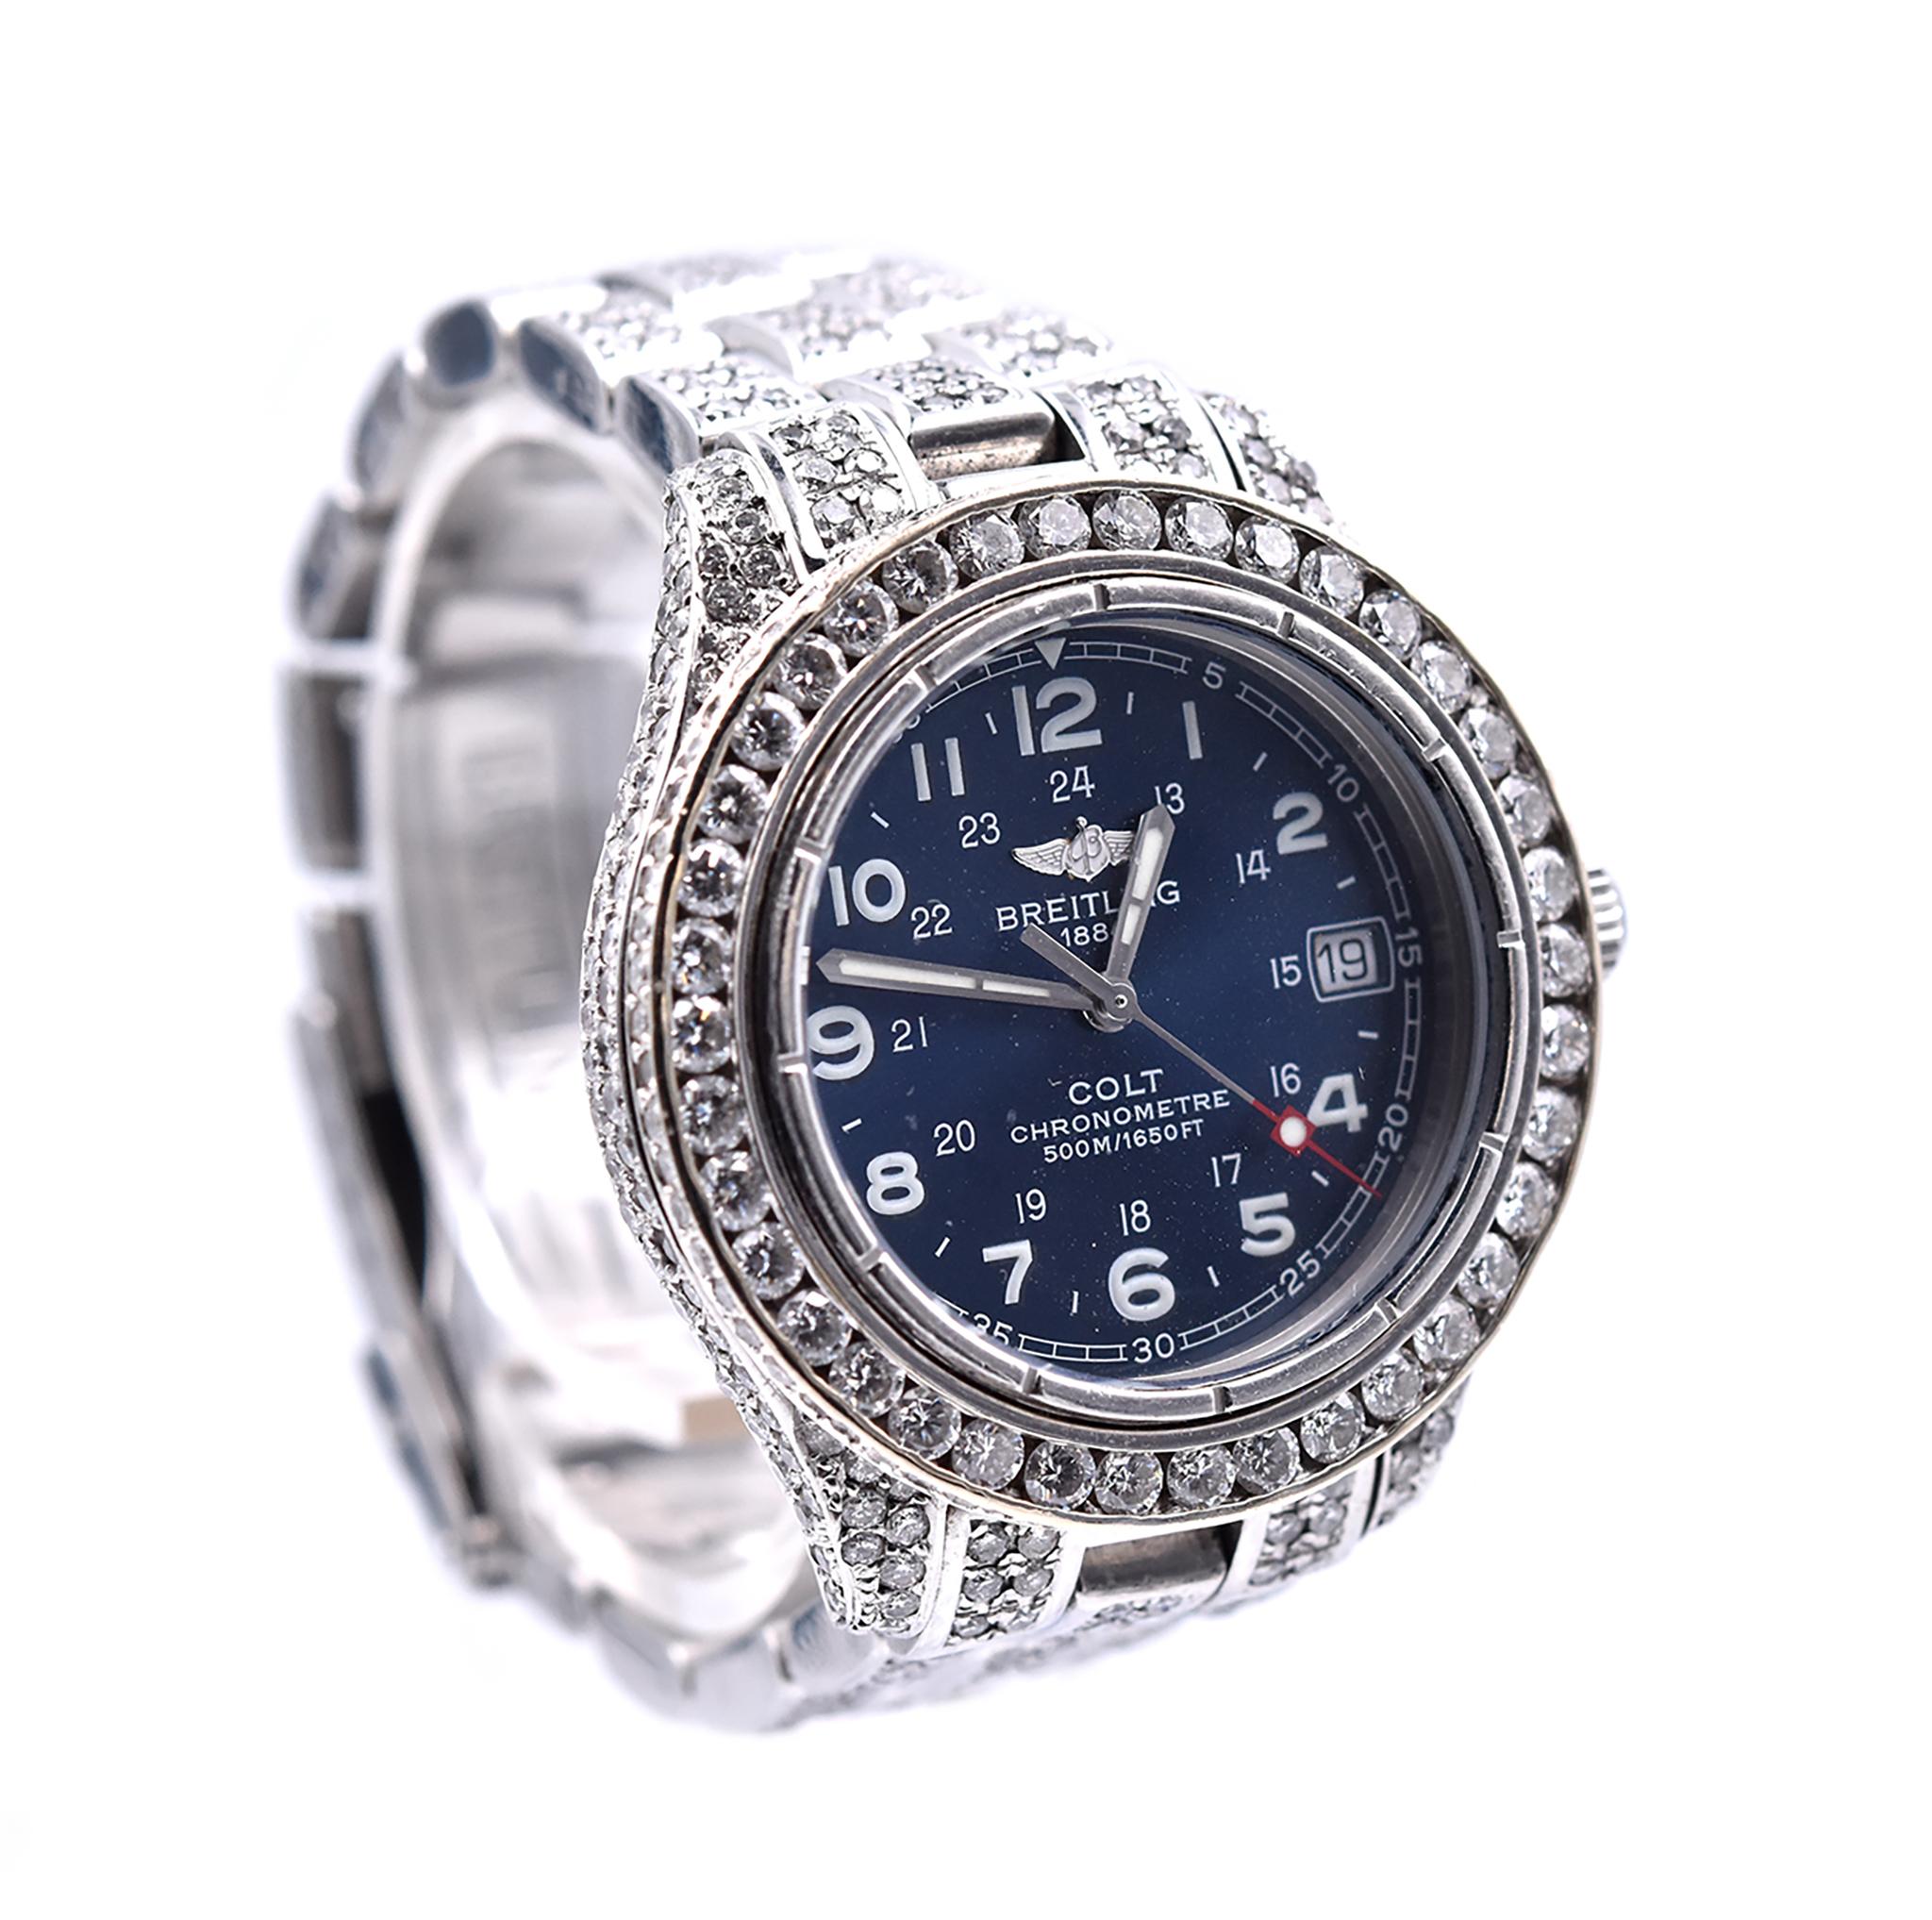 Brand: Breitling
Movement: quartz
Function: hours, minutes, seconds, date, chronometer, 70 hour power reserve
Case: round 28mm stainless steel case, scratch resistant sapphire crystal, water resistant to 500m, stainless steel push/pull crown, steel